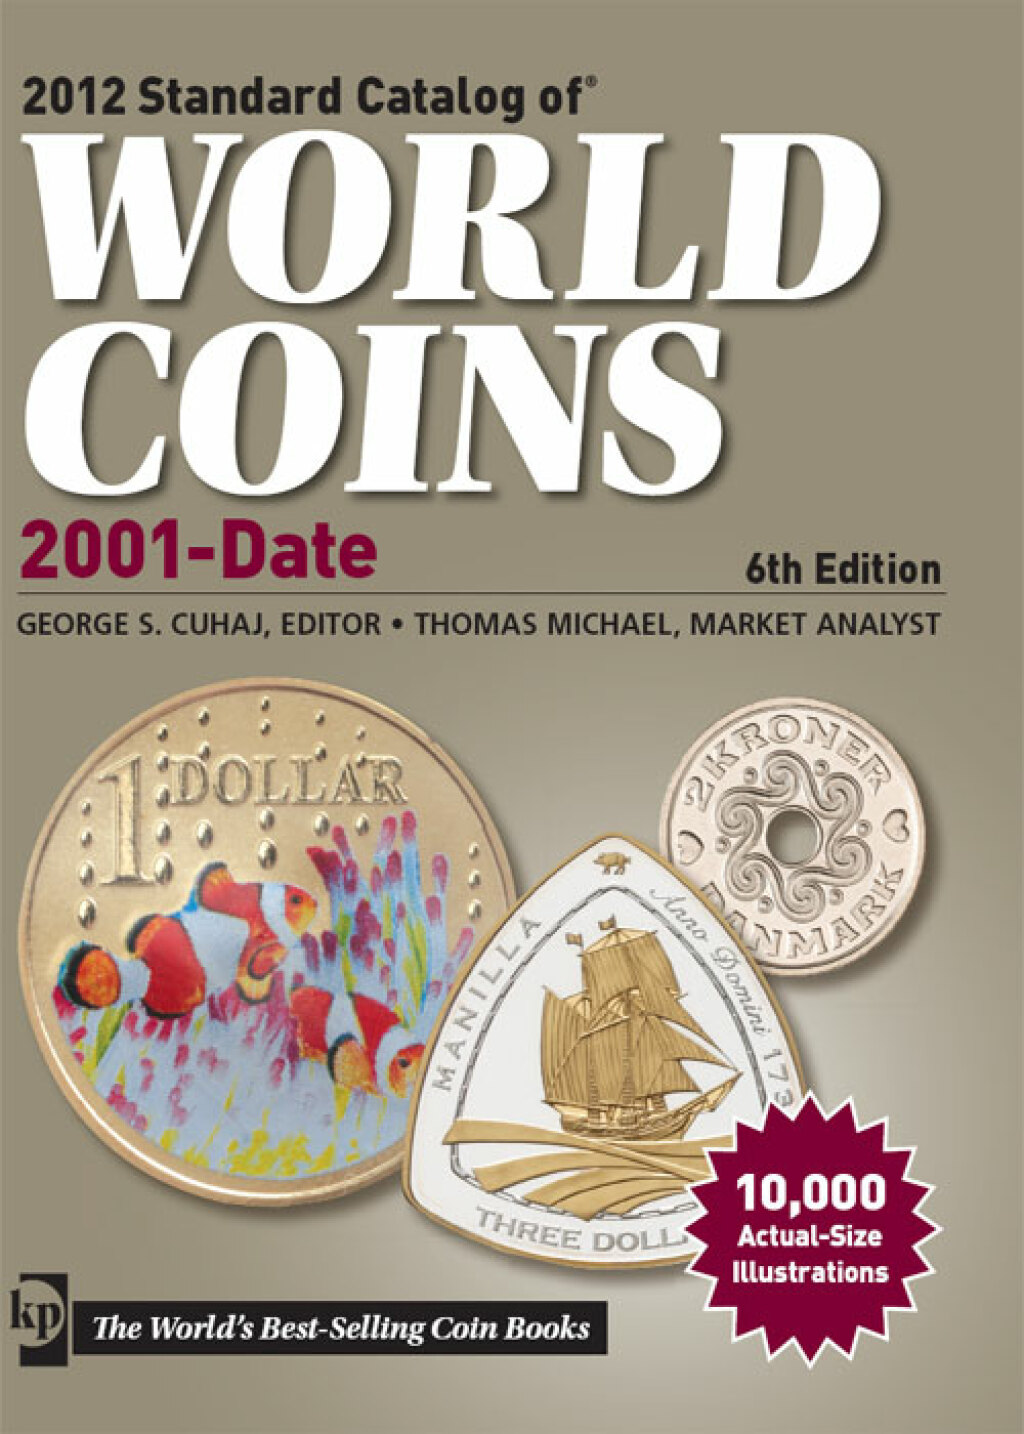 2012 Standard Catalog of World Coins 2001 to Date - 6th Edition (eBook)